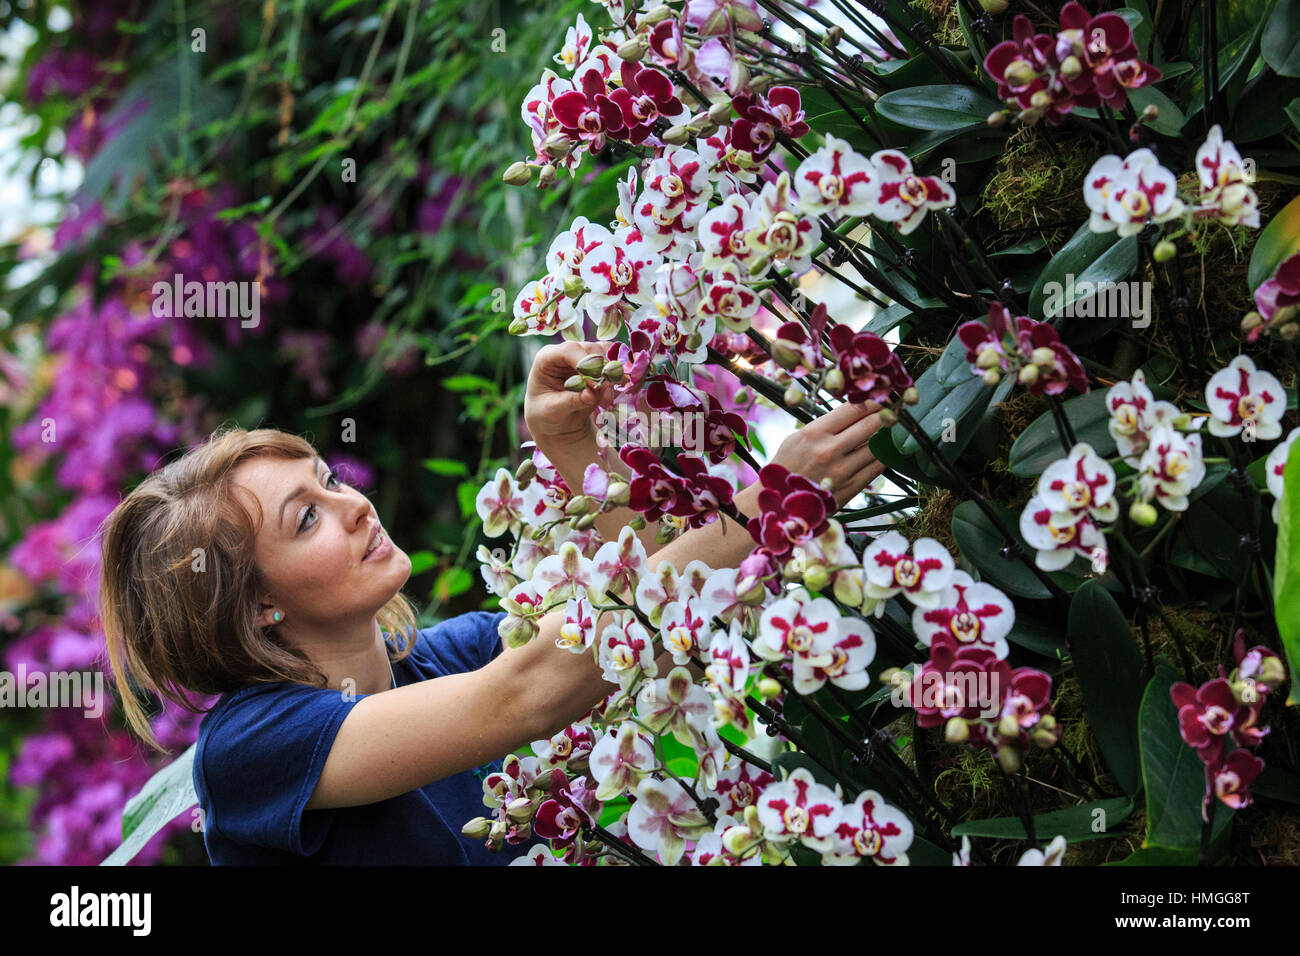 London, UK. 2 February 2017. Botanical Horticulturist Hannah Button with phalaenopsis orchids. Press preview of the Kew Gardens 2017 Orchids Festival which opens to the public on Saturday, 4 February in the Princess of Wales Conservatory. The 22nd annual Kew Orchid Festival is a colourful celebration of India's vibrant plants and culture. It took Kew staff and volunteers 1,600 hours to create. 3,600 orchids are on display until 5 March 2017. Stock Photo